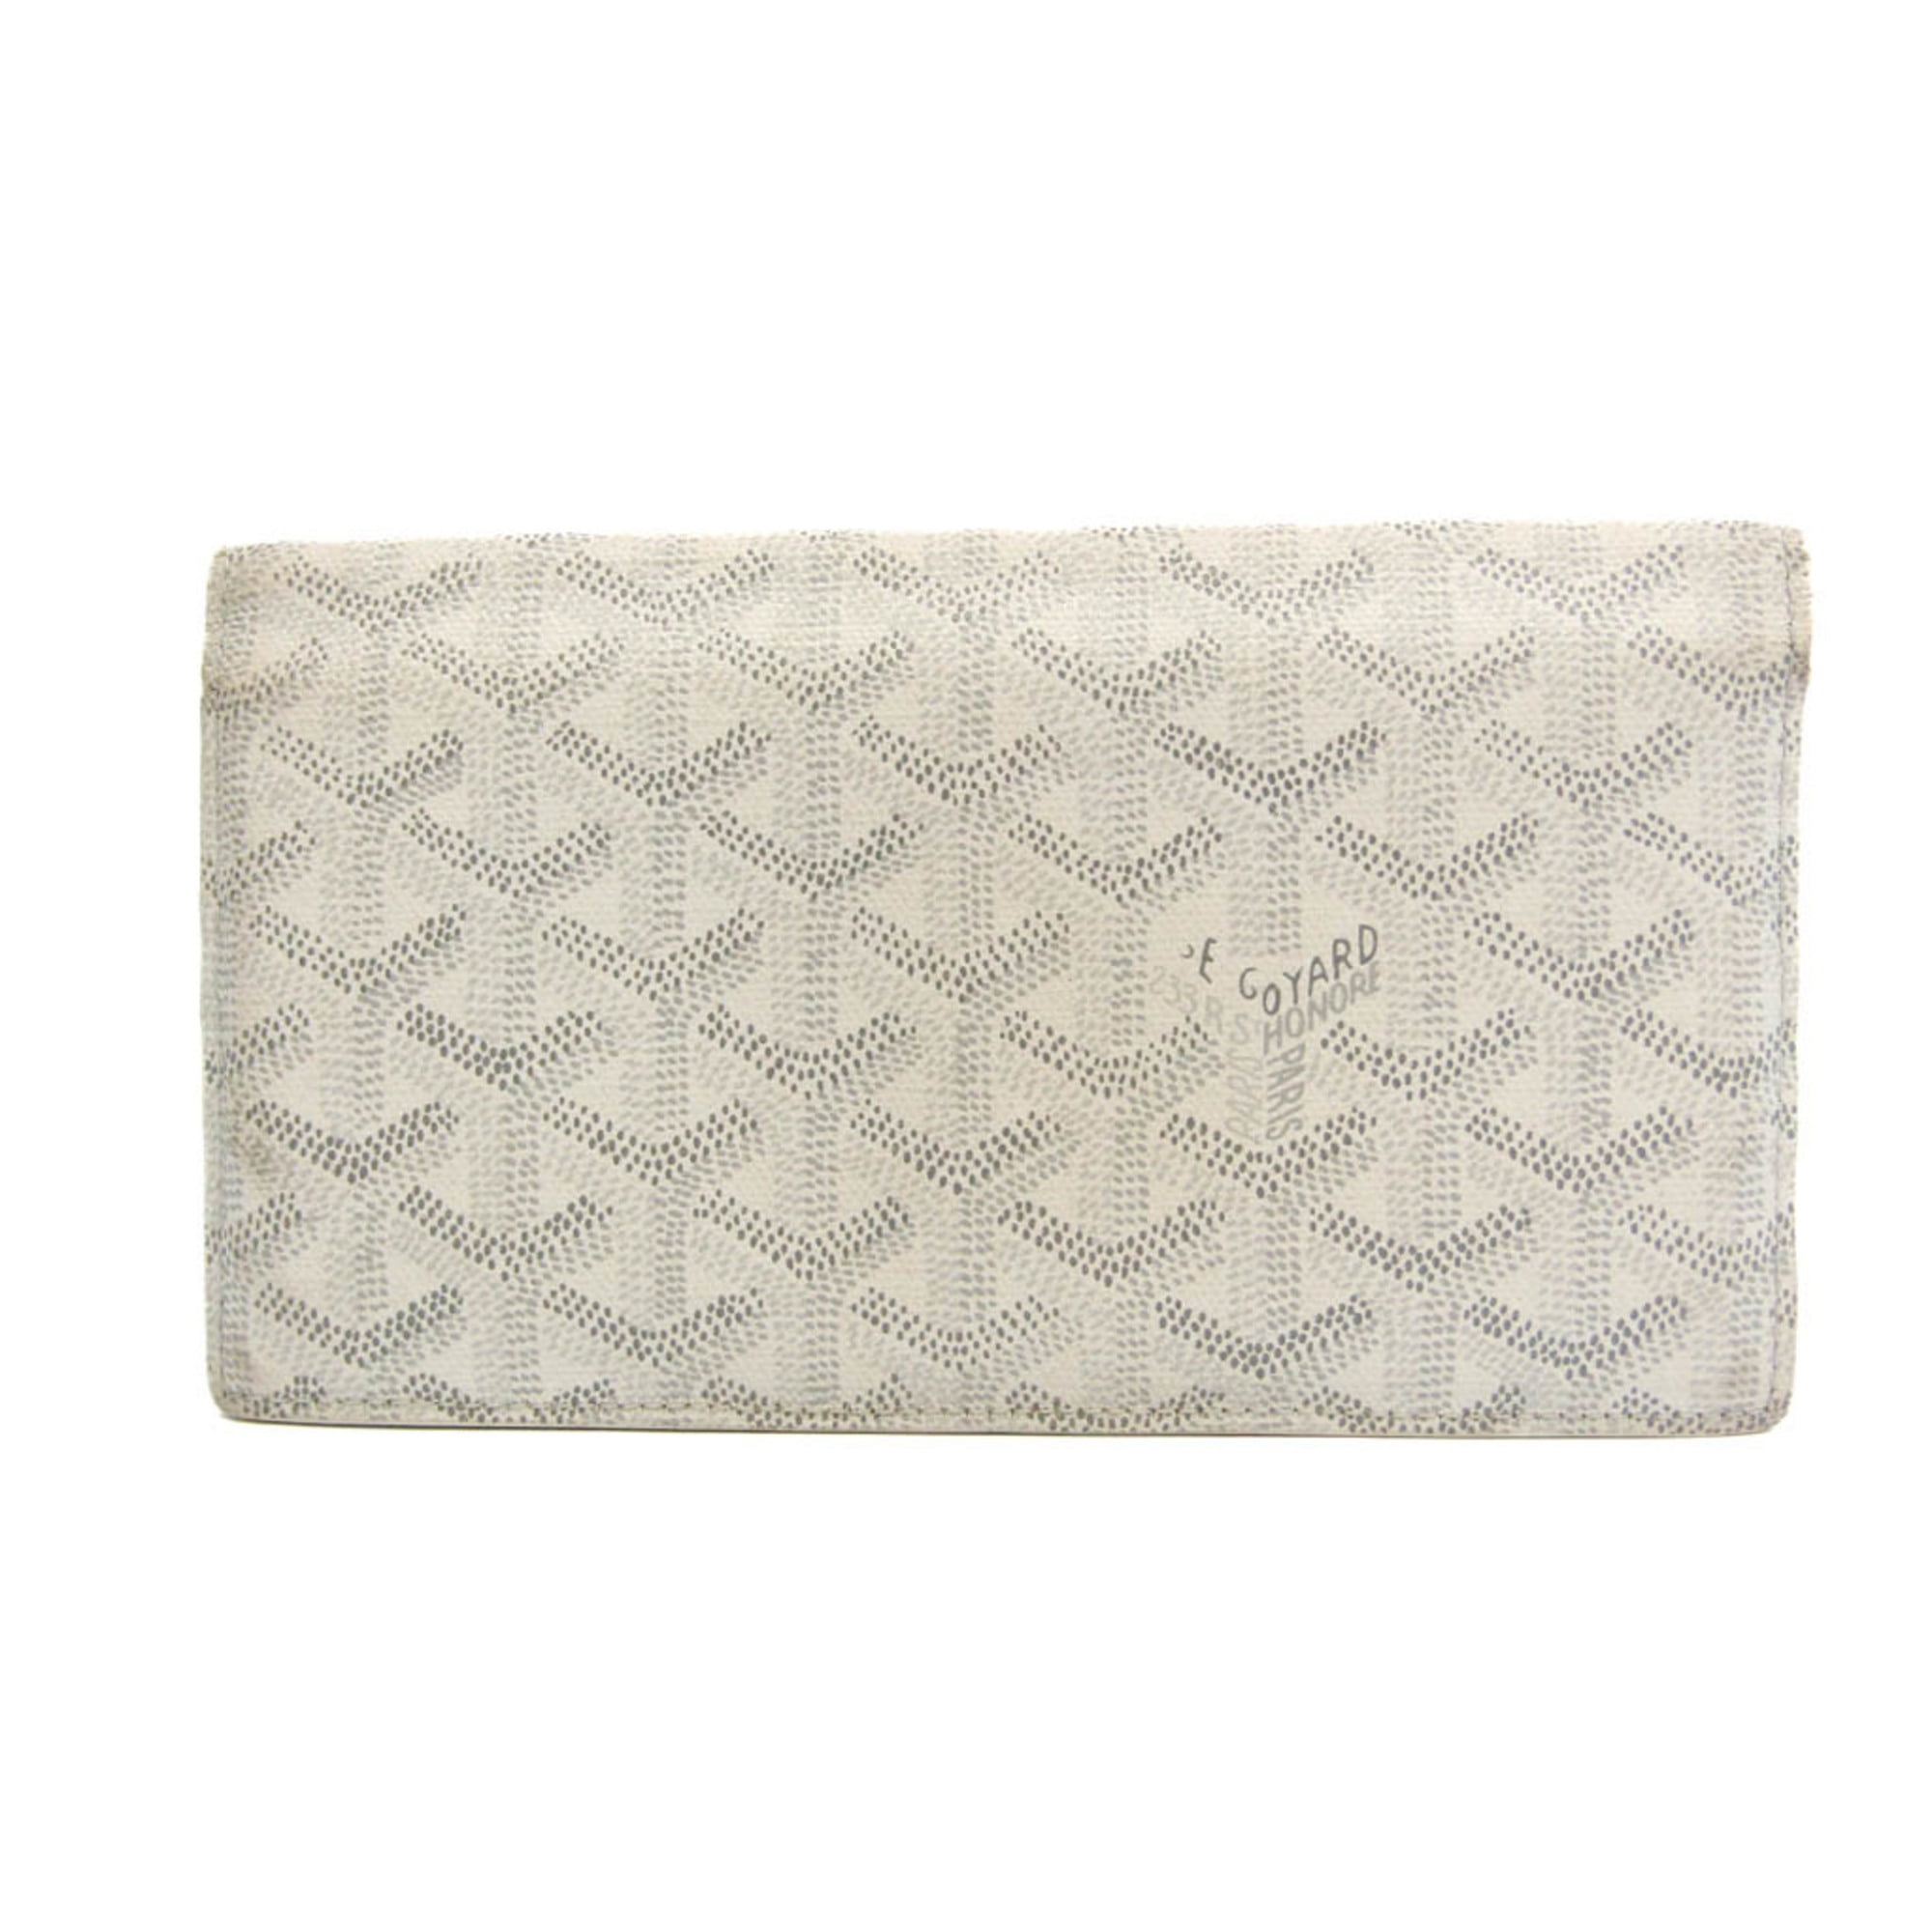 Louis Vuitton - Authenticated Wallet - Cloth White for Women, Good Condition